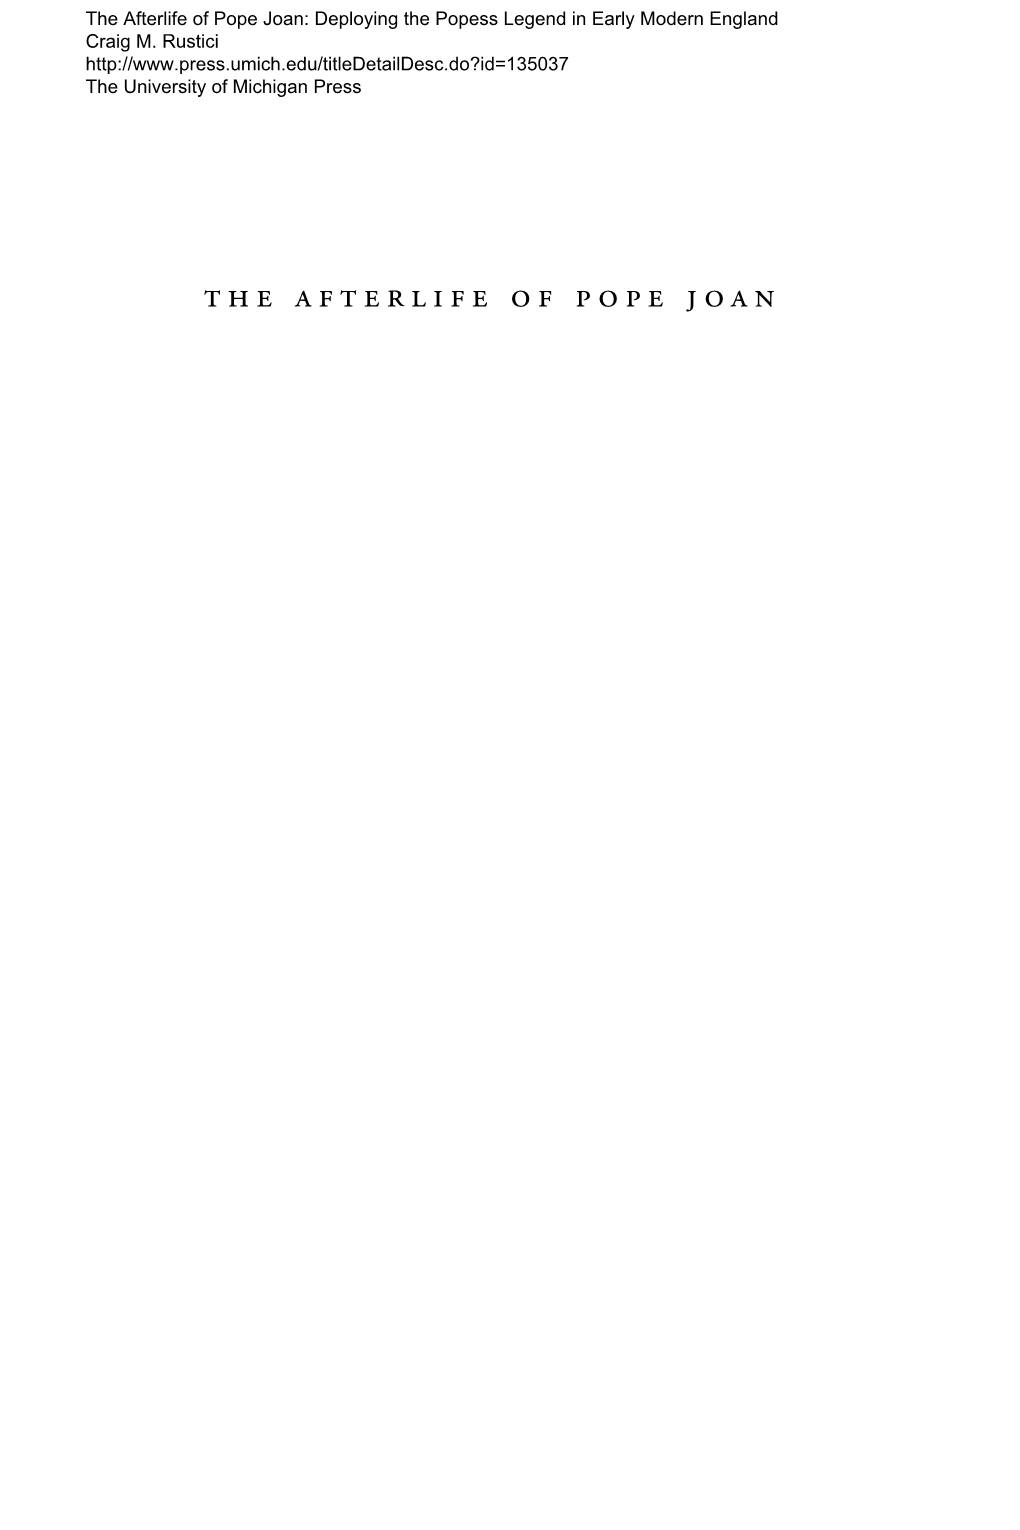 The Afterlife of Pope Joan: Deploying the Popess Legend in Early Modern England Craig M